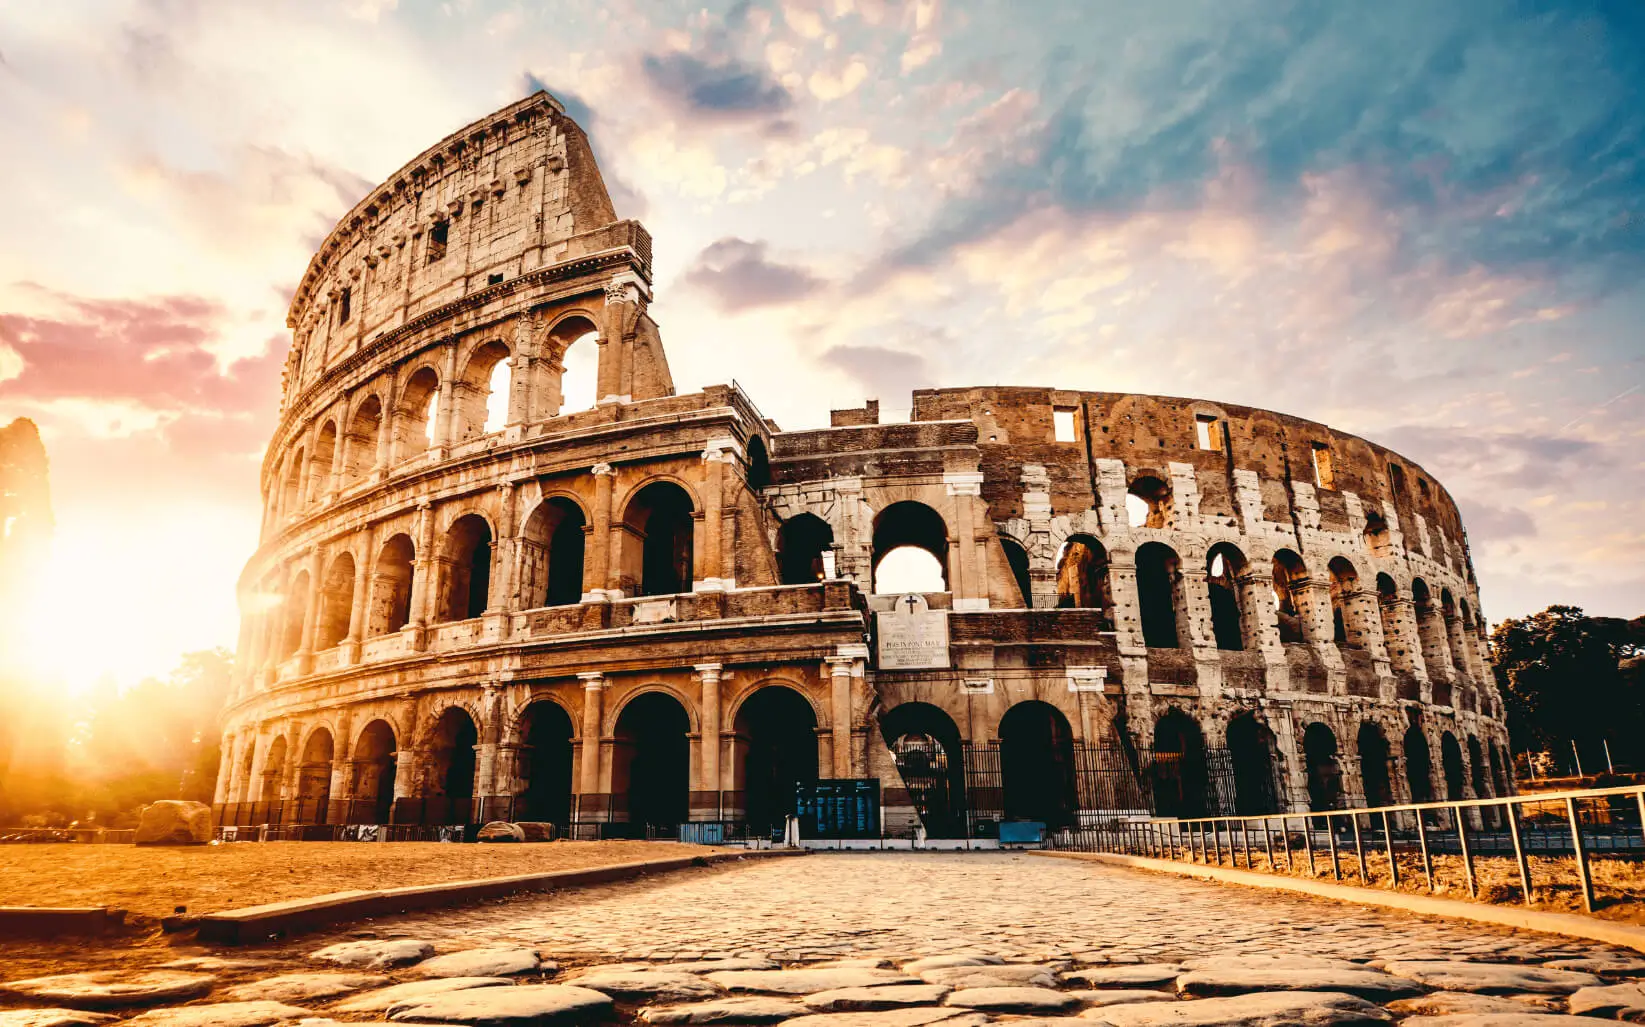 The Colosseum in Rome, Italy at sunset.